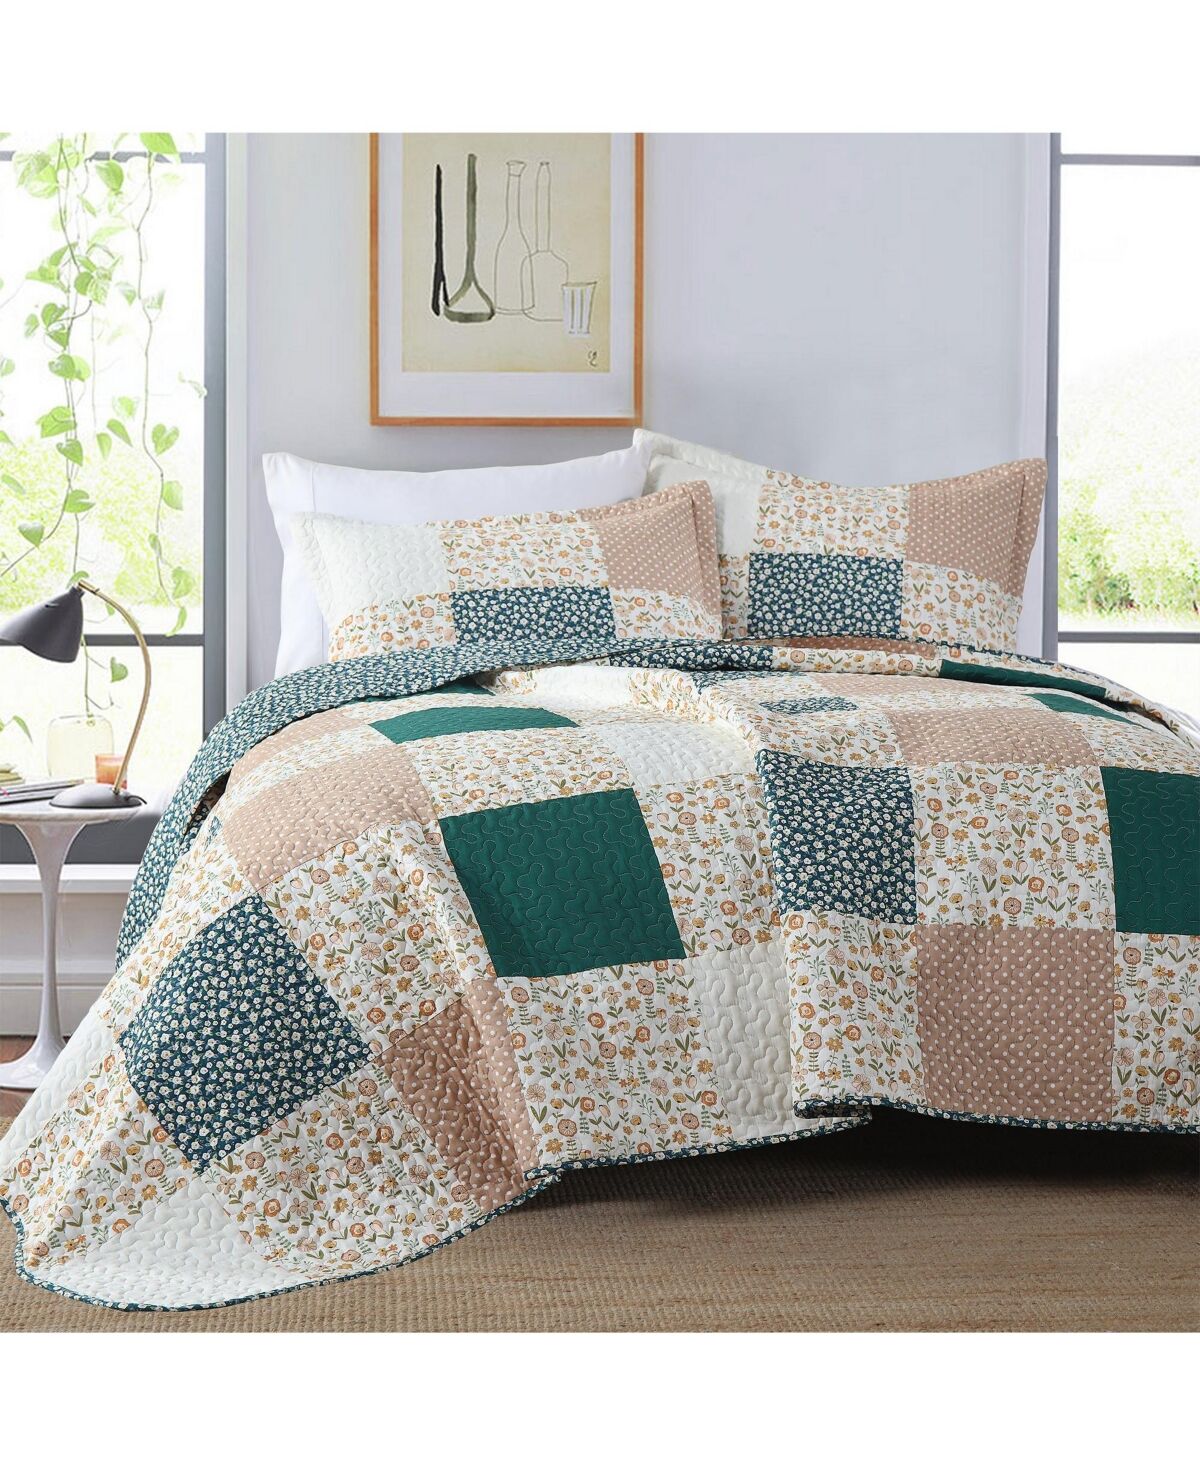 MarCielo 3Pcs Handcrafted Christmas Patchwork Cotton Vintage Style Holiday Bedspread Set - Queen - Brown